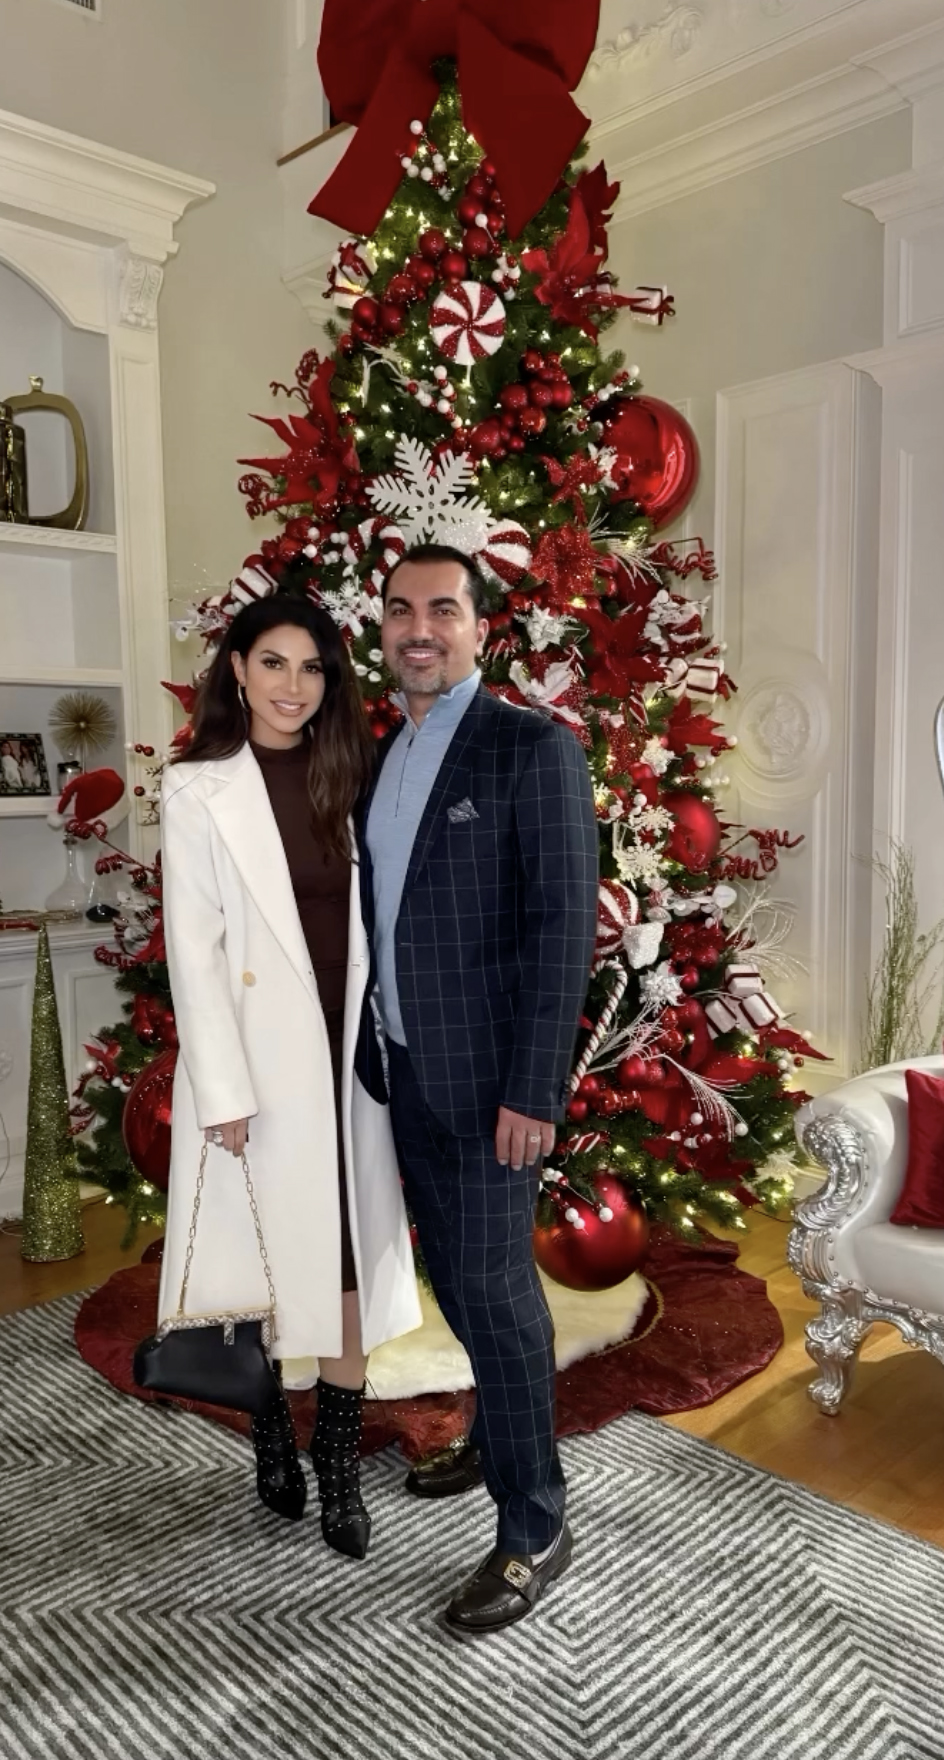 Jennifer and her husband Bill Aydin posed in front of their red and white Christmas tree